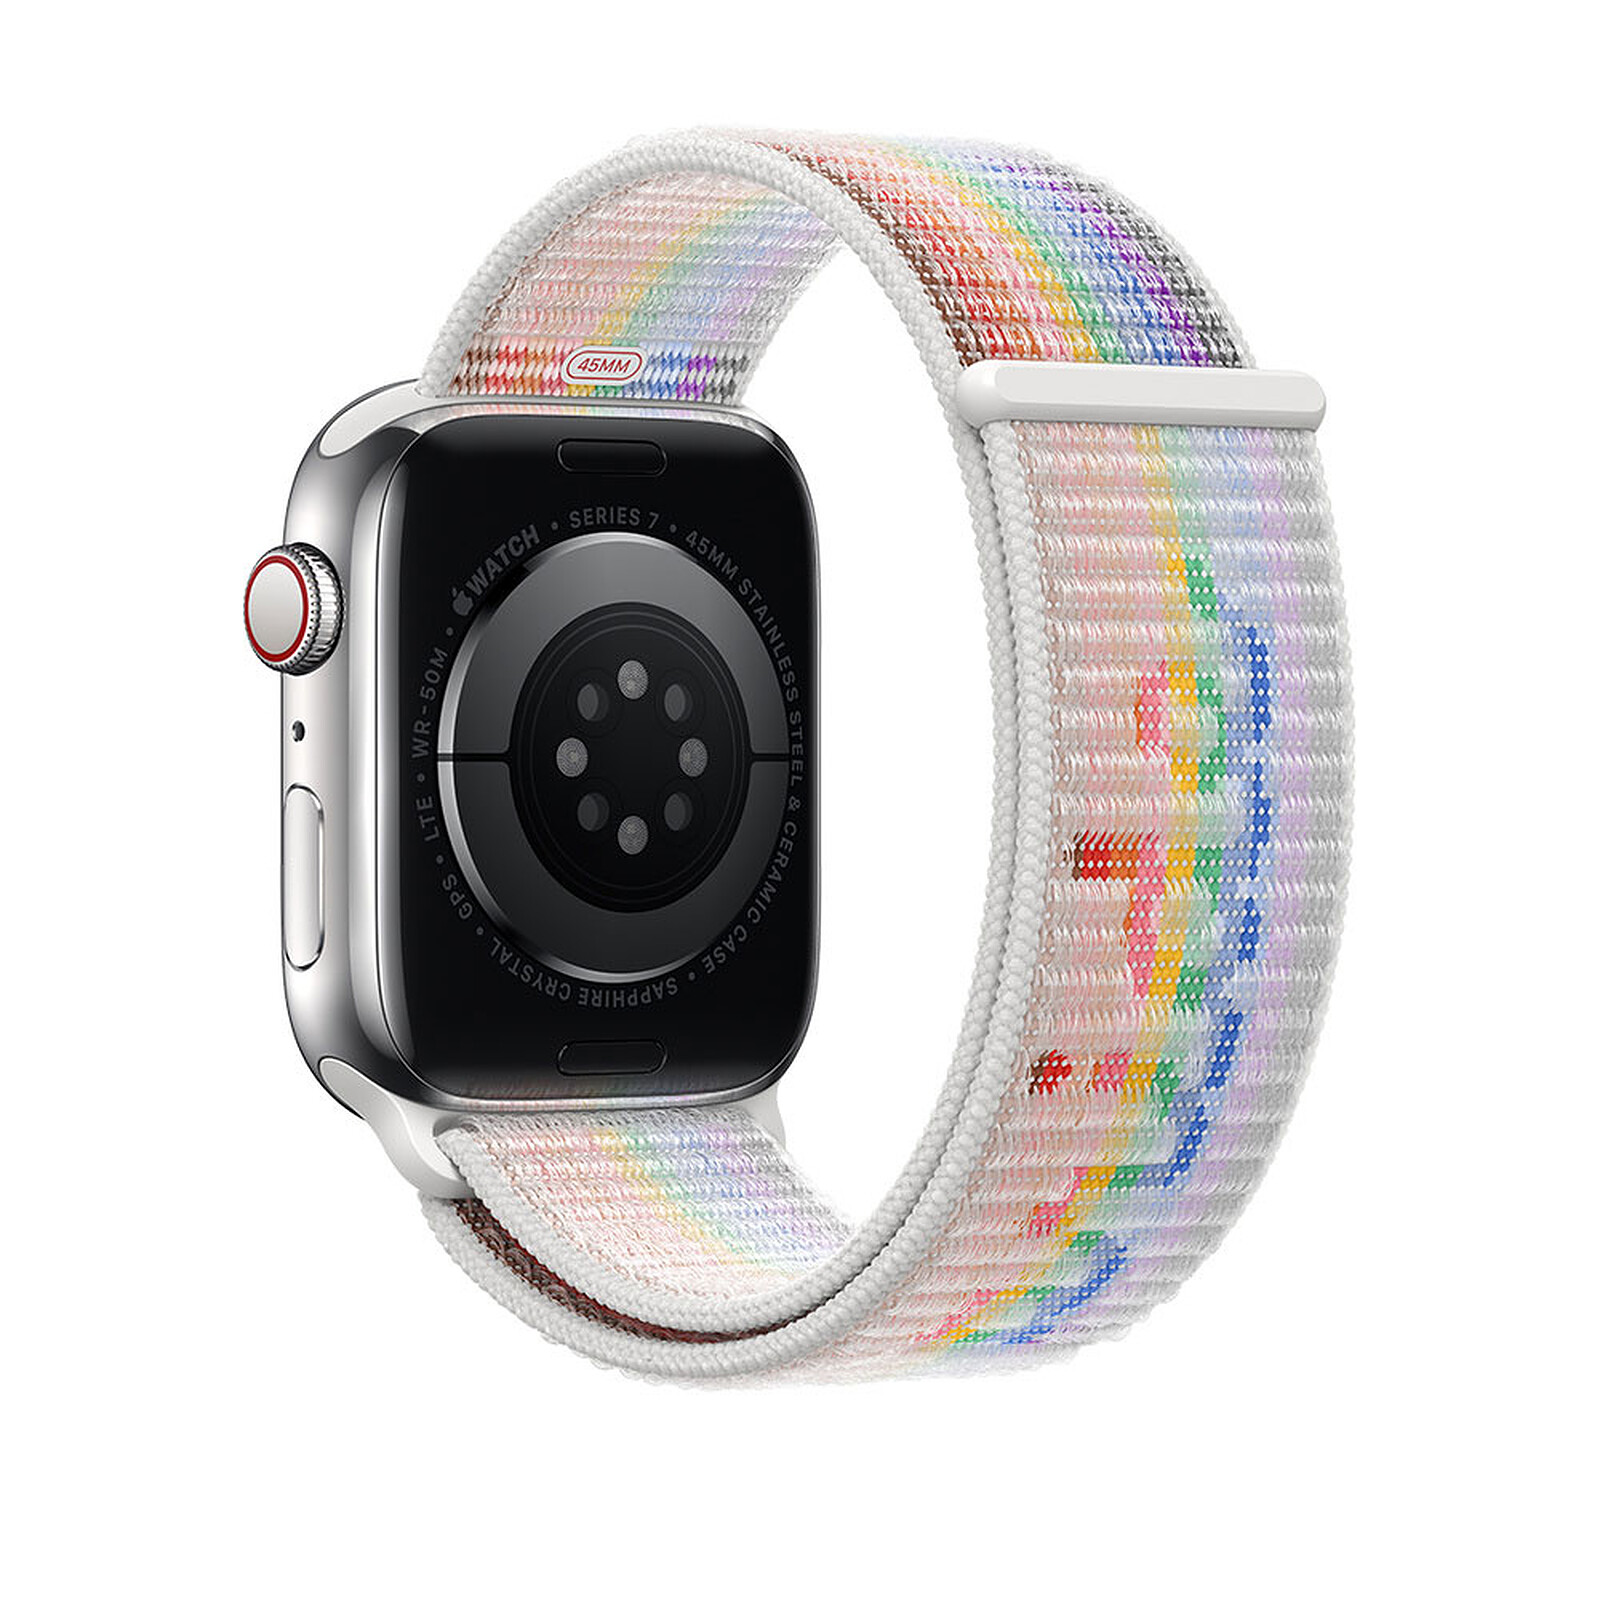 Apple Buckle Sport Pride Edition - accessories Moley 41 - LDLC | mm Holy for Watch Apple Wearable